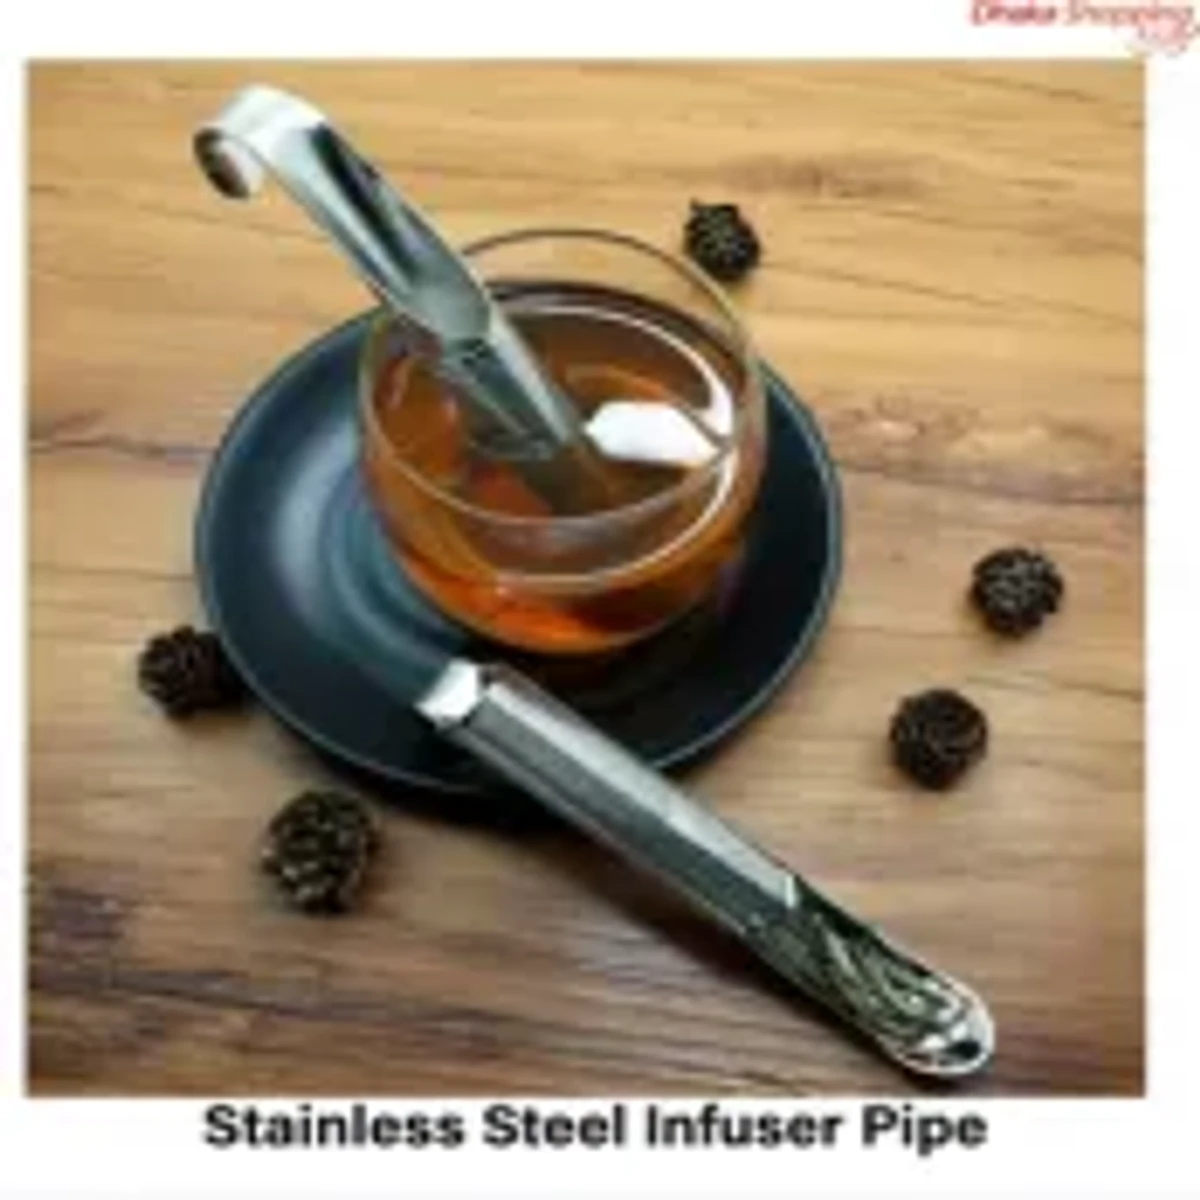 Kitchen Accessories new Tea Strainer Amazing Stainless Steel Infuser Pipe Design Touch Feel Holder Tool Tea Spoon Infuser Filter-Tea Making Accessories-gold palace